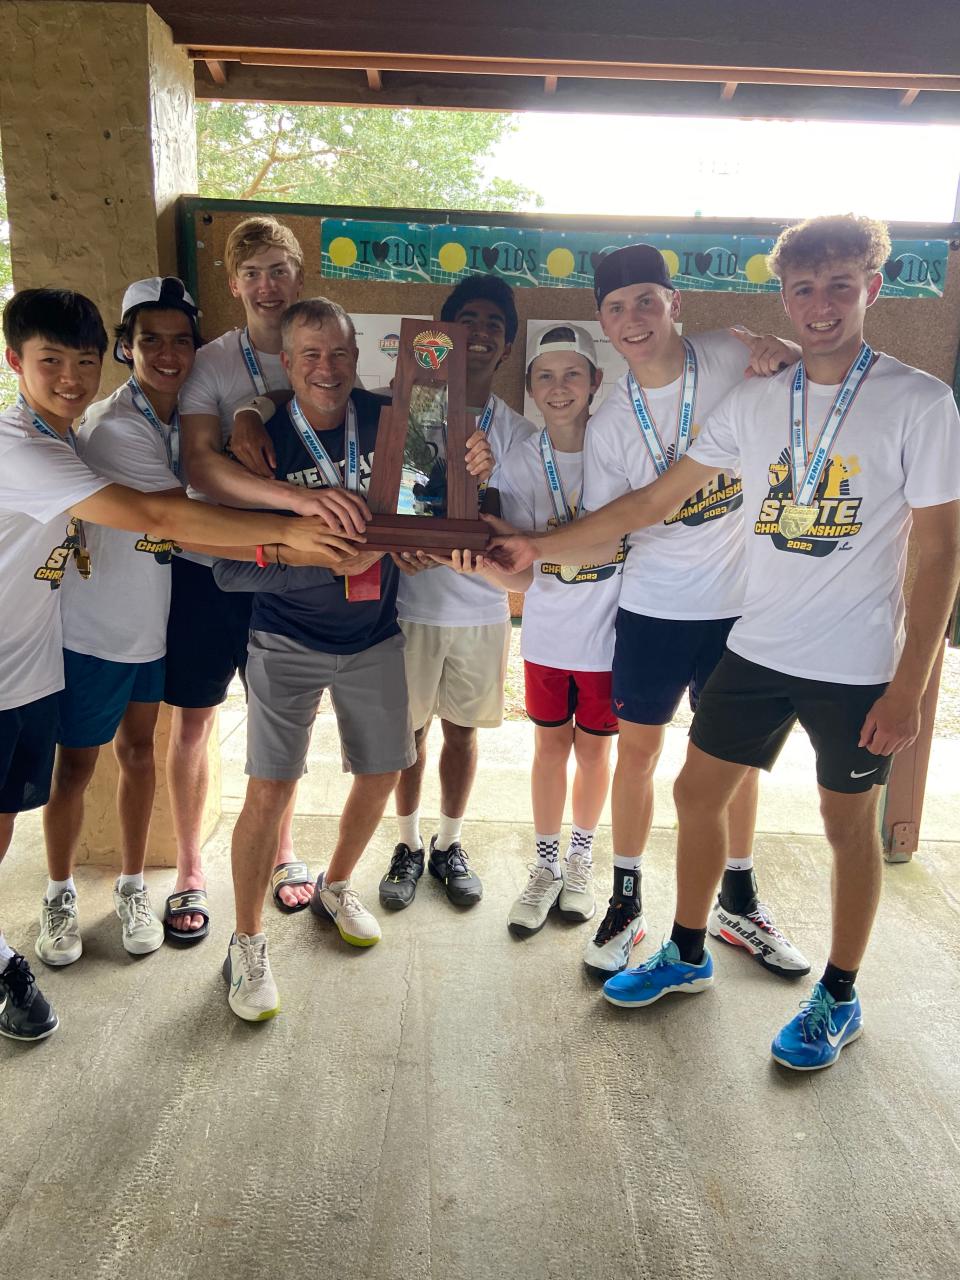 The American Heritage-Delray boys tennis team celebrates its 2023 FHSAA state championship on Saturday, April 29, 2023. The Stallions did not drop a set in districts, regionals or state tournament play. The Stallions' 2024 team will try to replace key contributors lost to graduation.